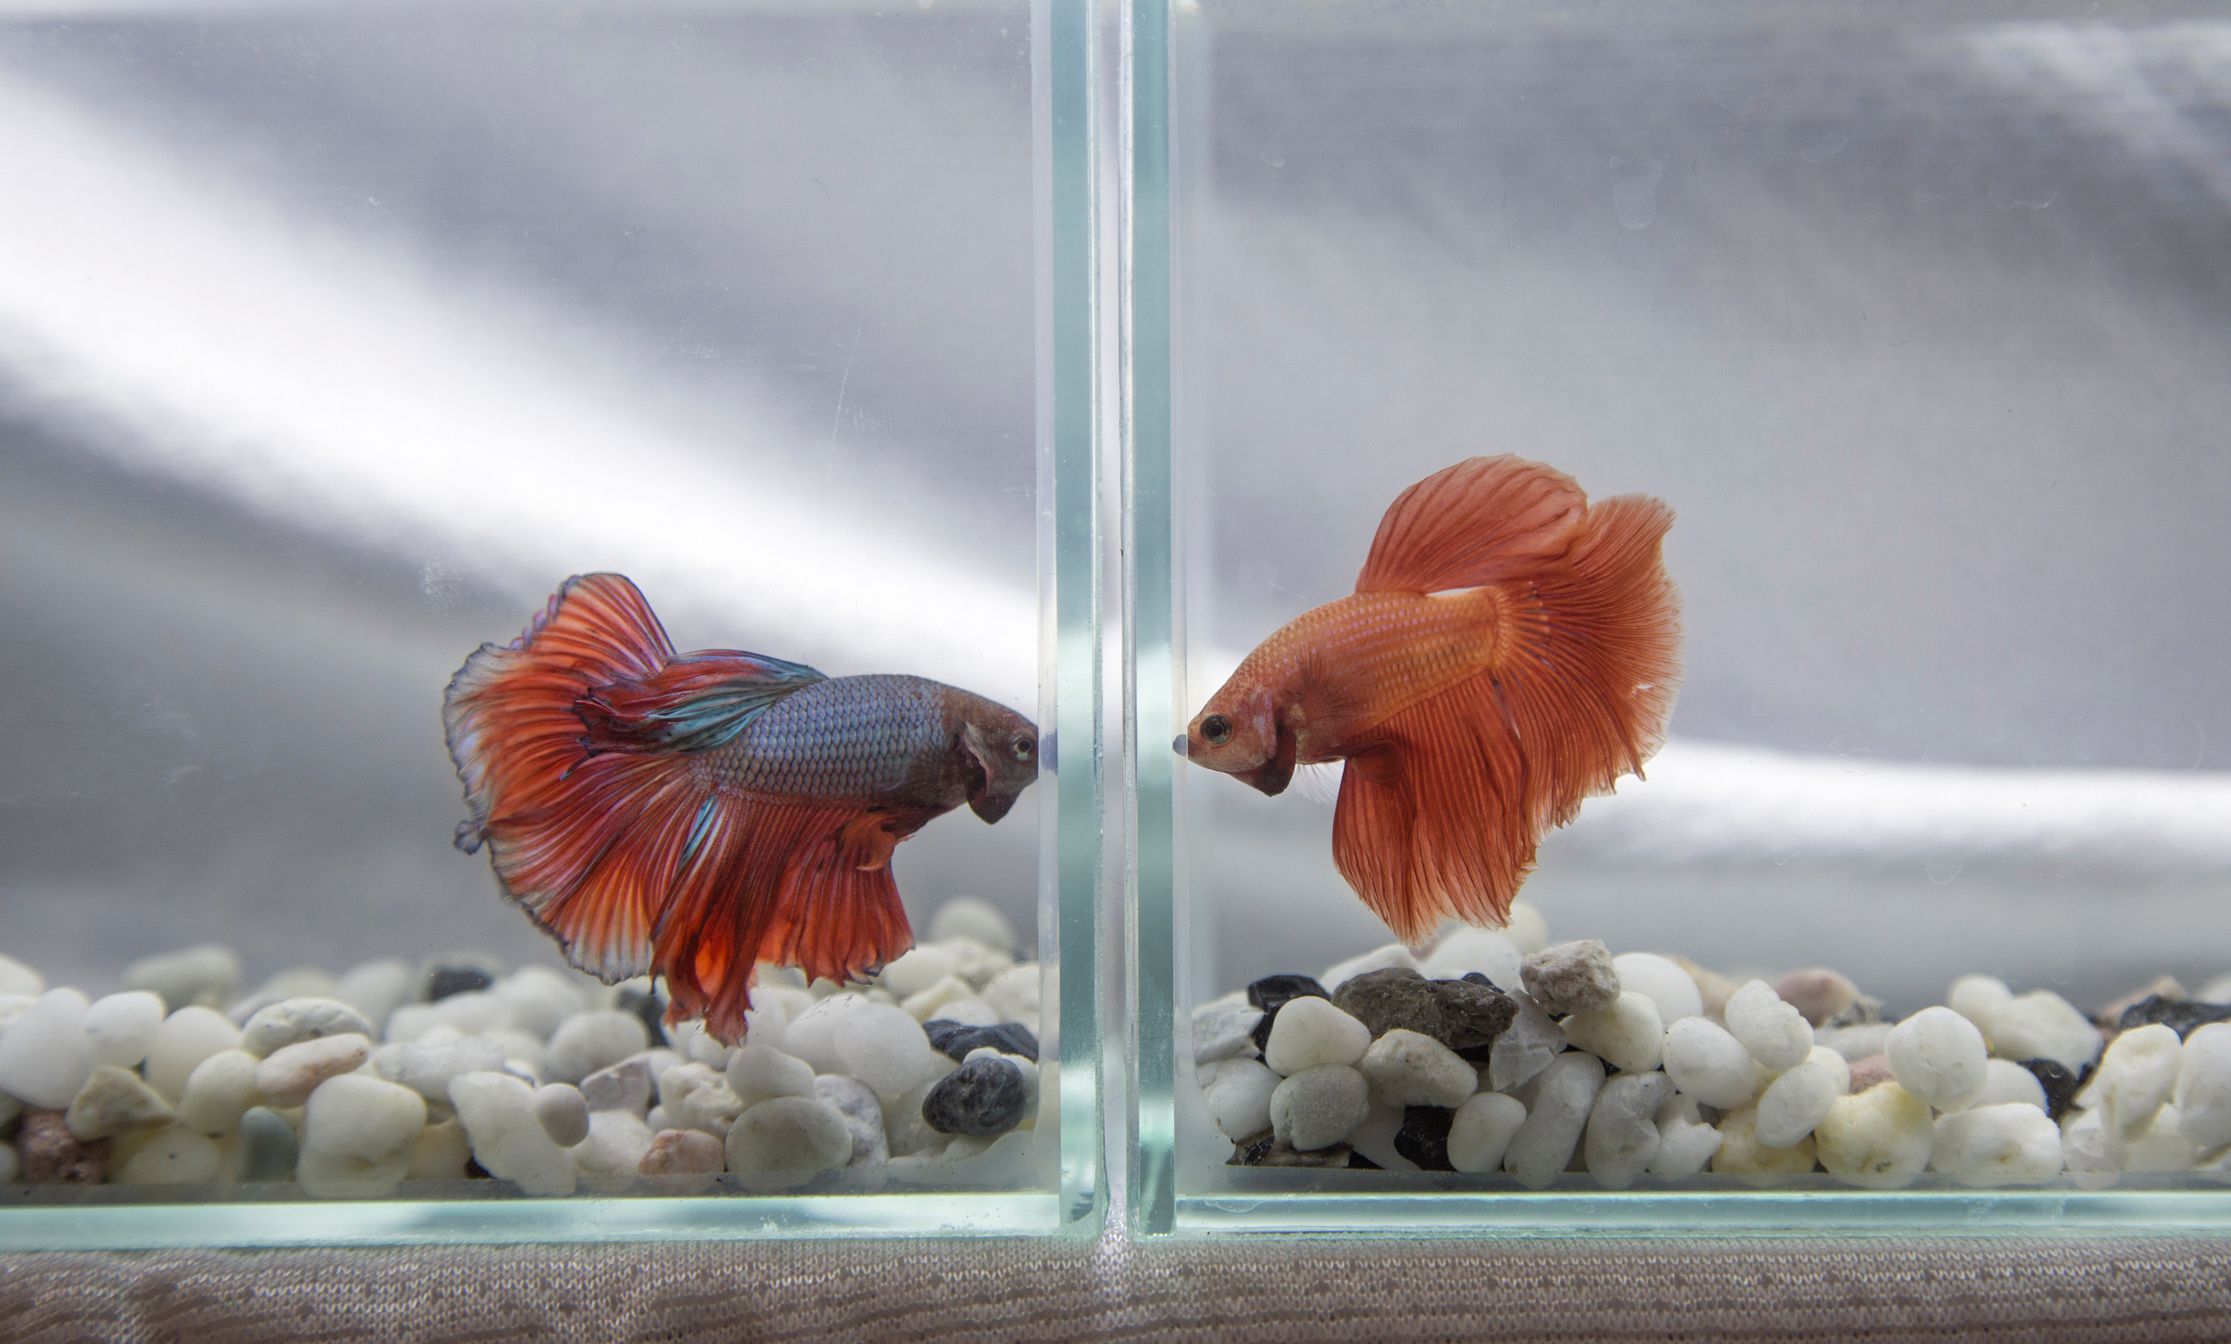 Aggressive behavior in betta fish like gill flaring and constant chasing